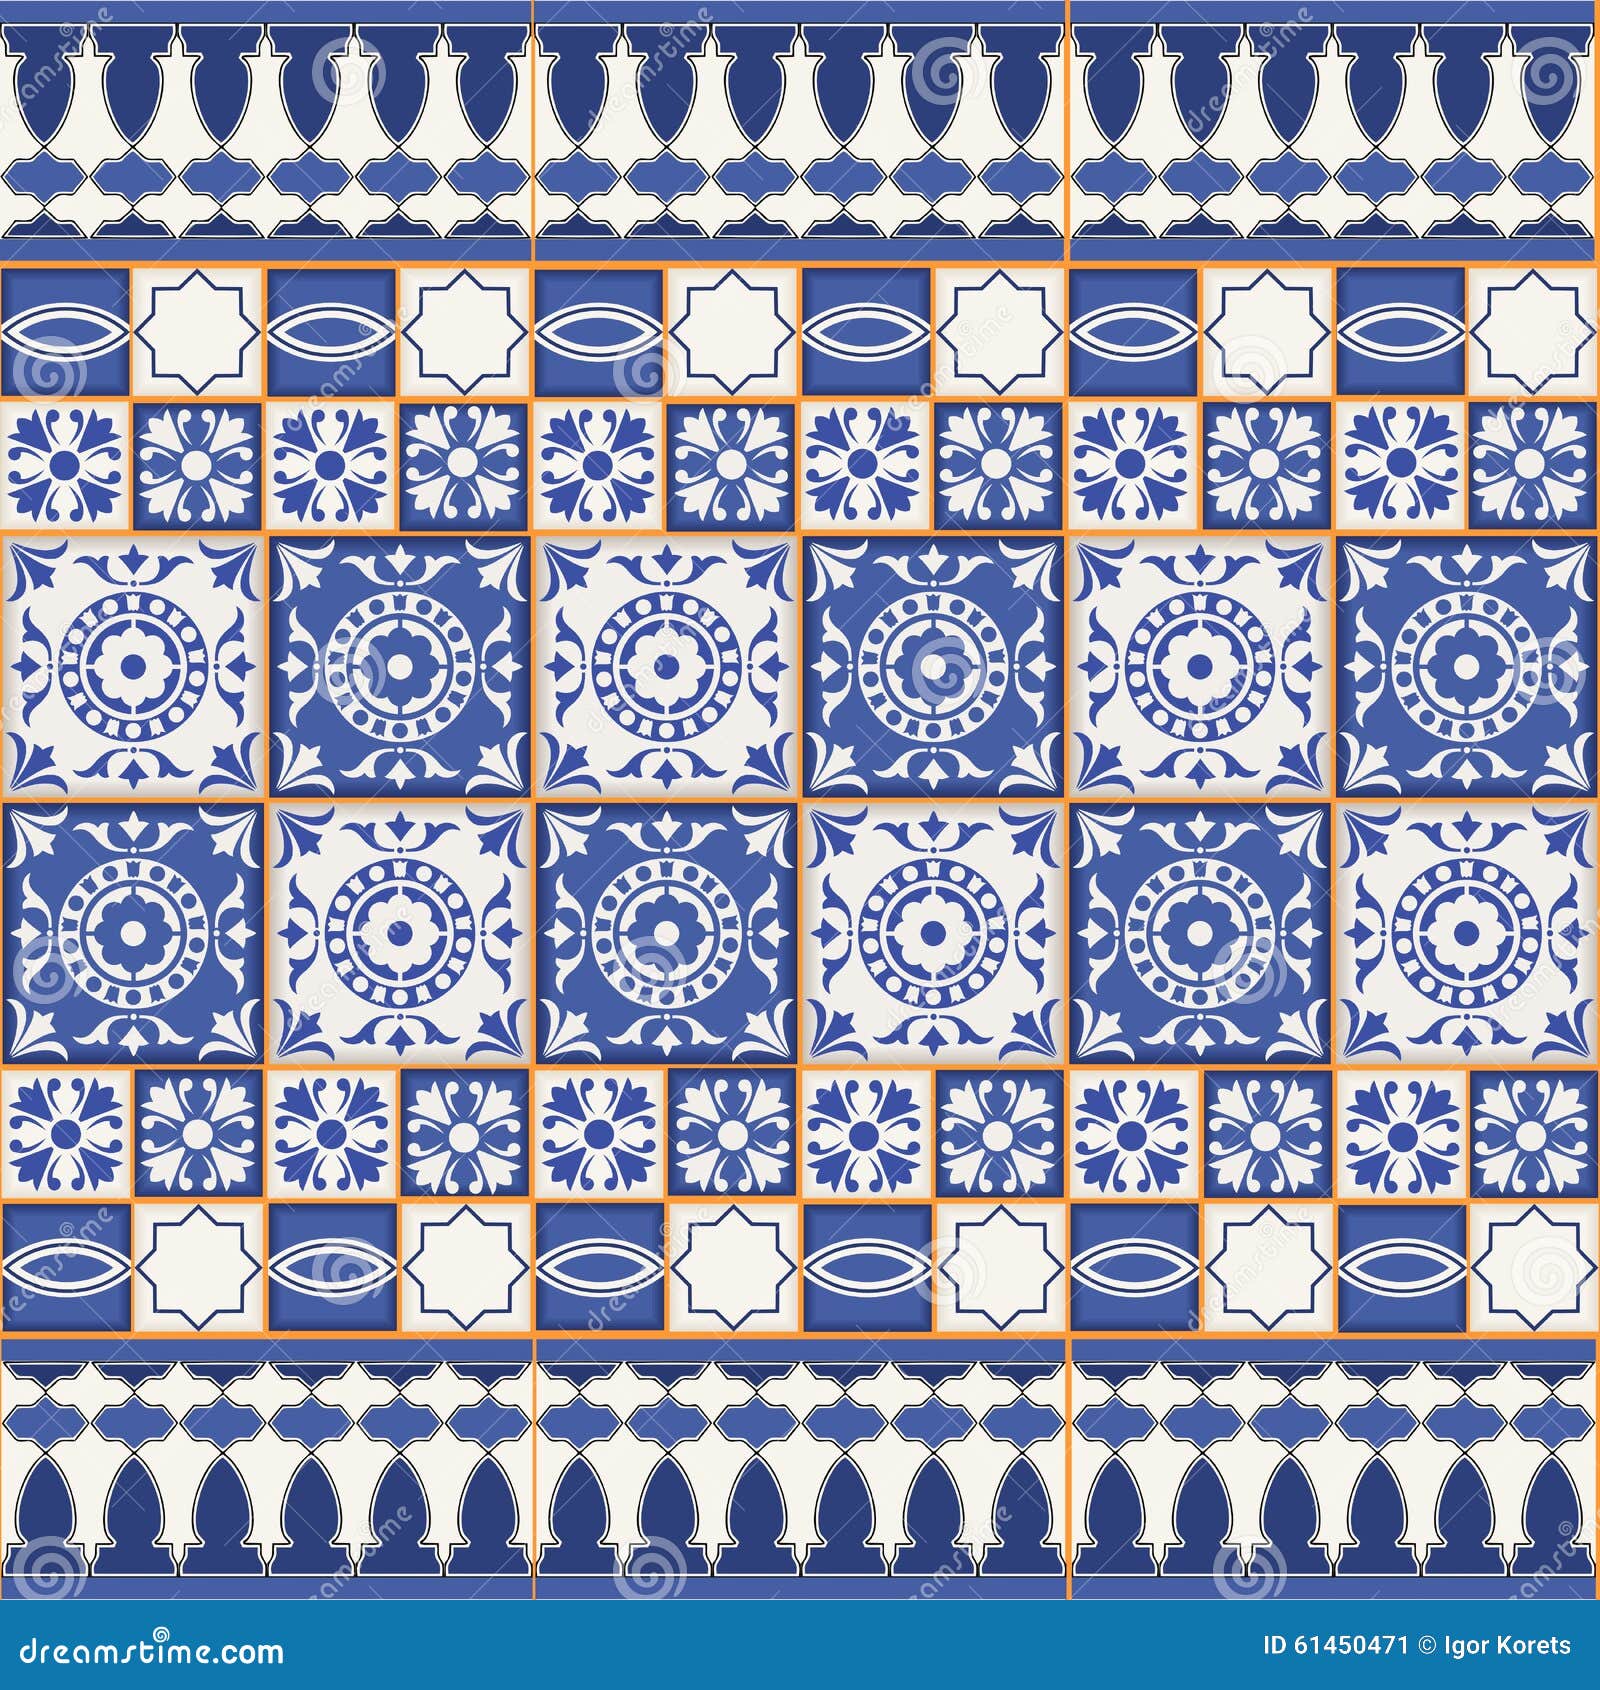 gorgeous seamless pattern from tiles and border. moroccan, portuguese, azulejo ornaments.